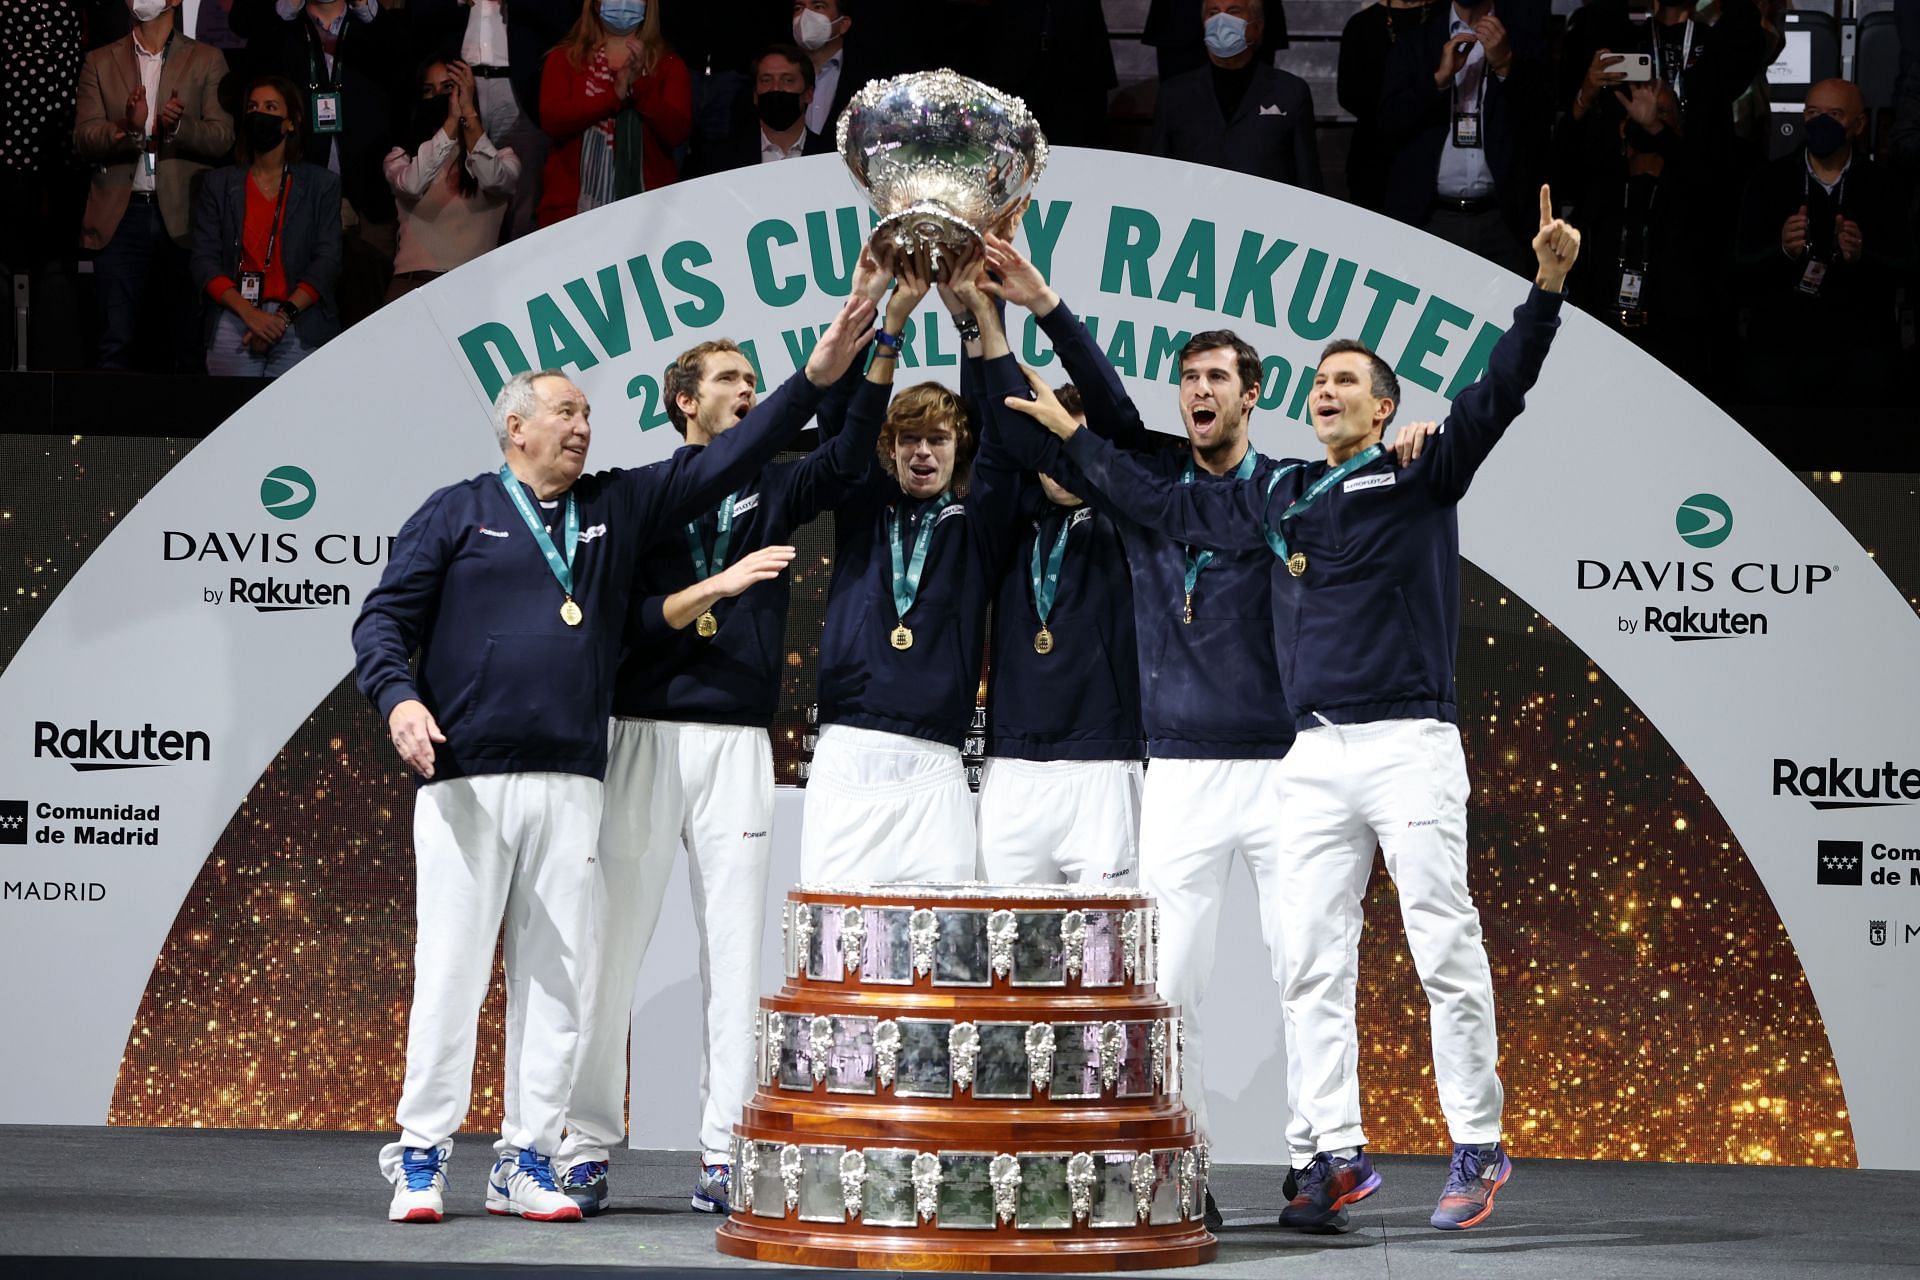 The Russian Tennis Federation celebrating their win over Croatia at the 2021 Davis Cup Finals.